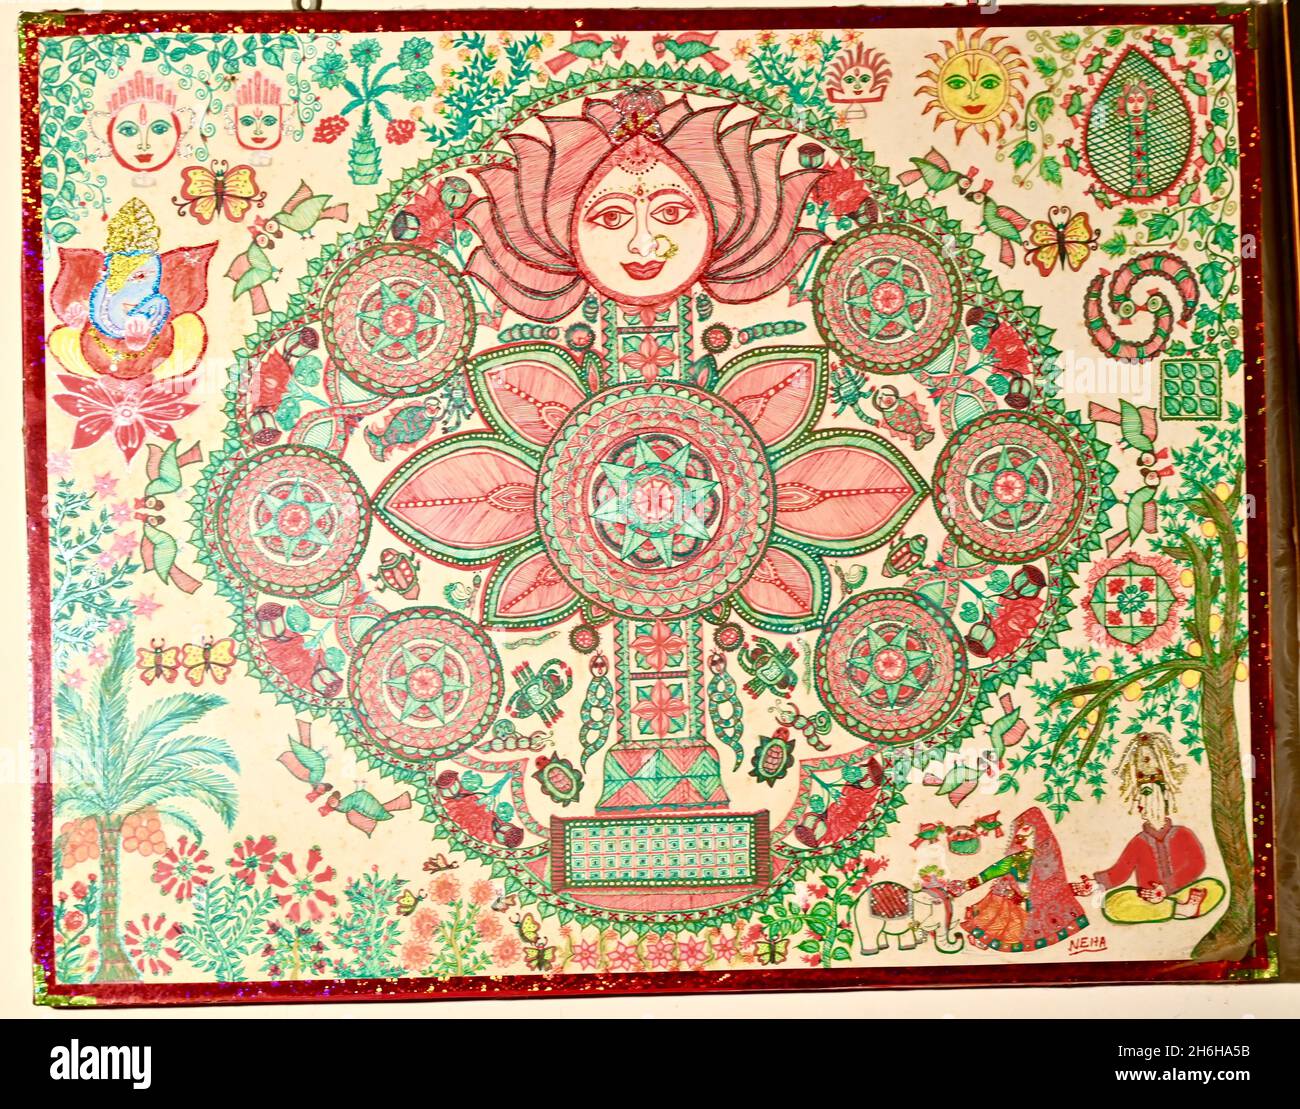 JAMSHEDPUR, INDIA - Oct 15, 2021: The Mithila ritual painting for weddings in Jamshedpur, India. Stock Photo